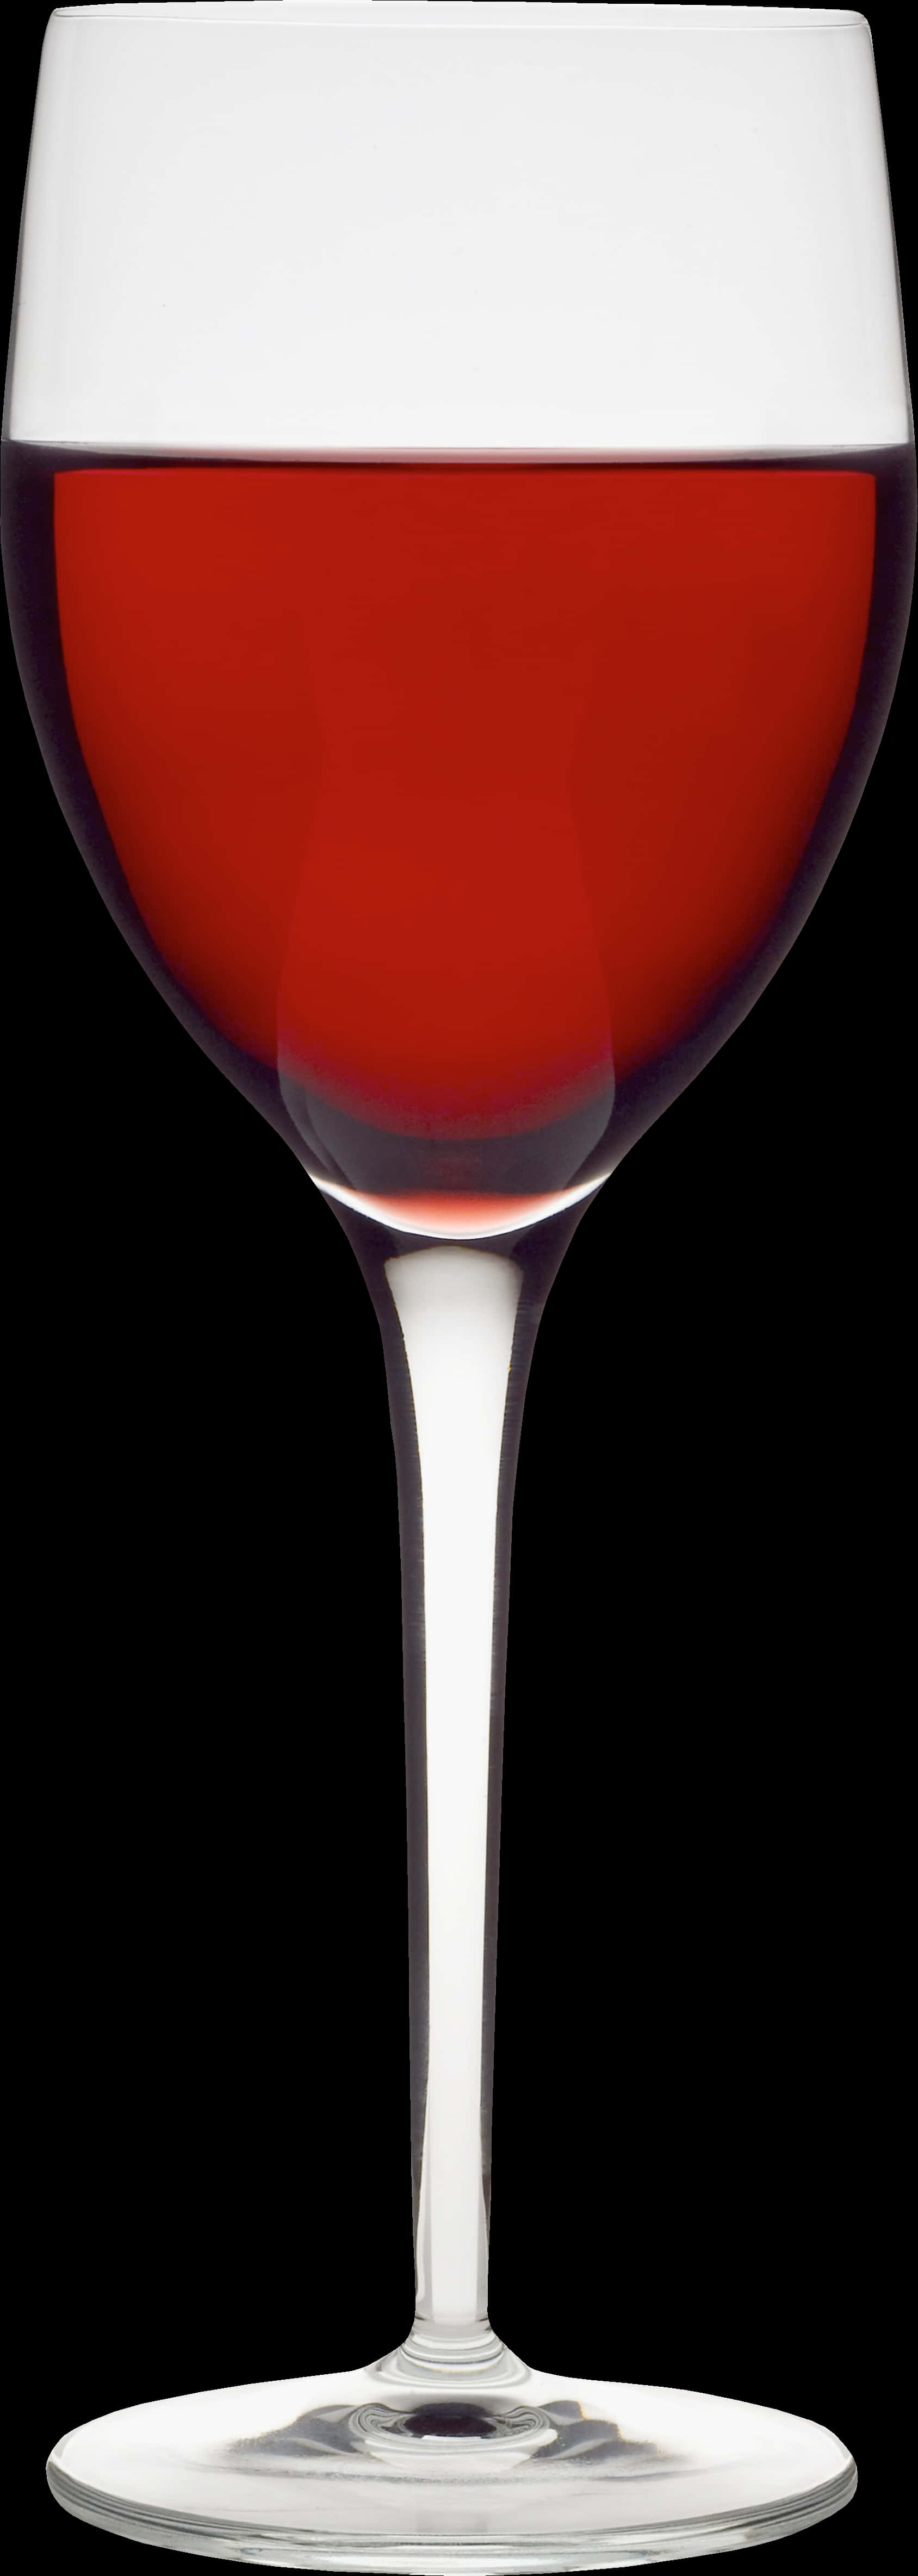 A Close-up Of A Glass Of Red Wine